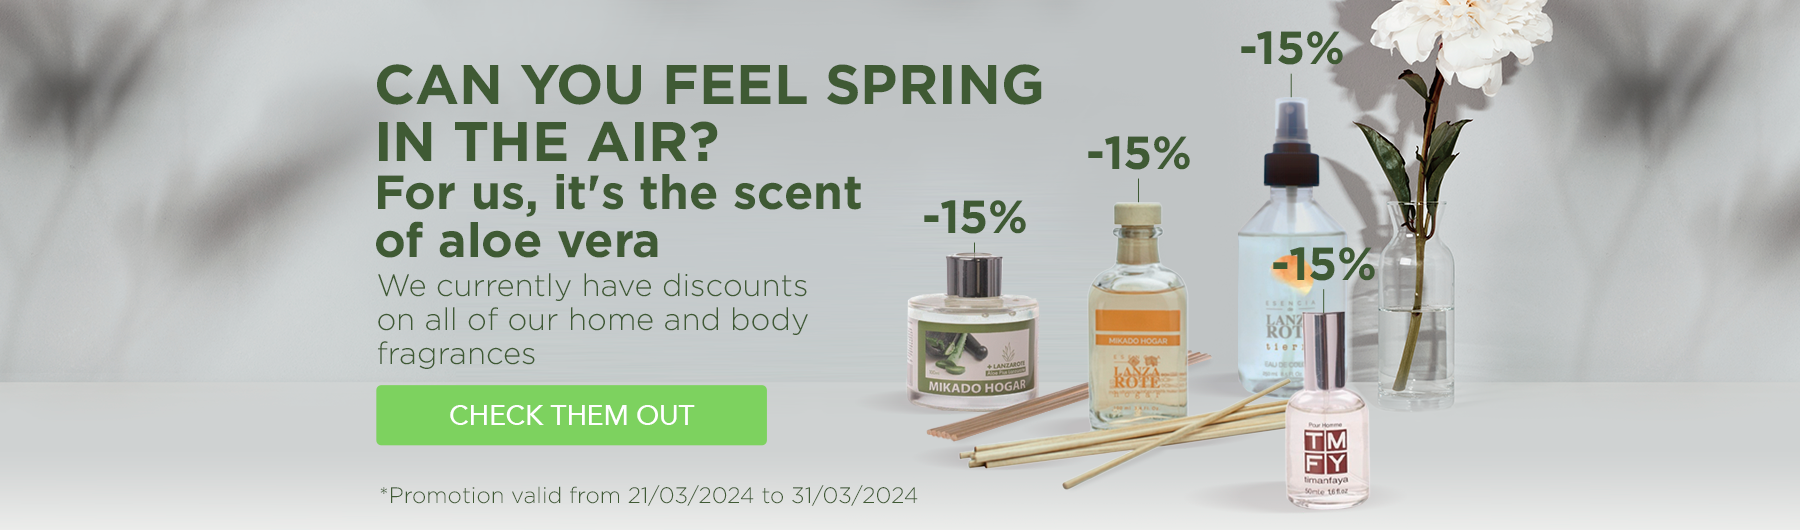 With the arrival of spring, aloe is offering you a 15% discount on our fragrances.